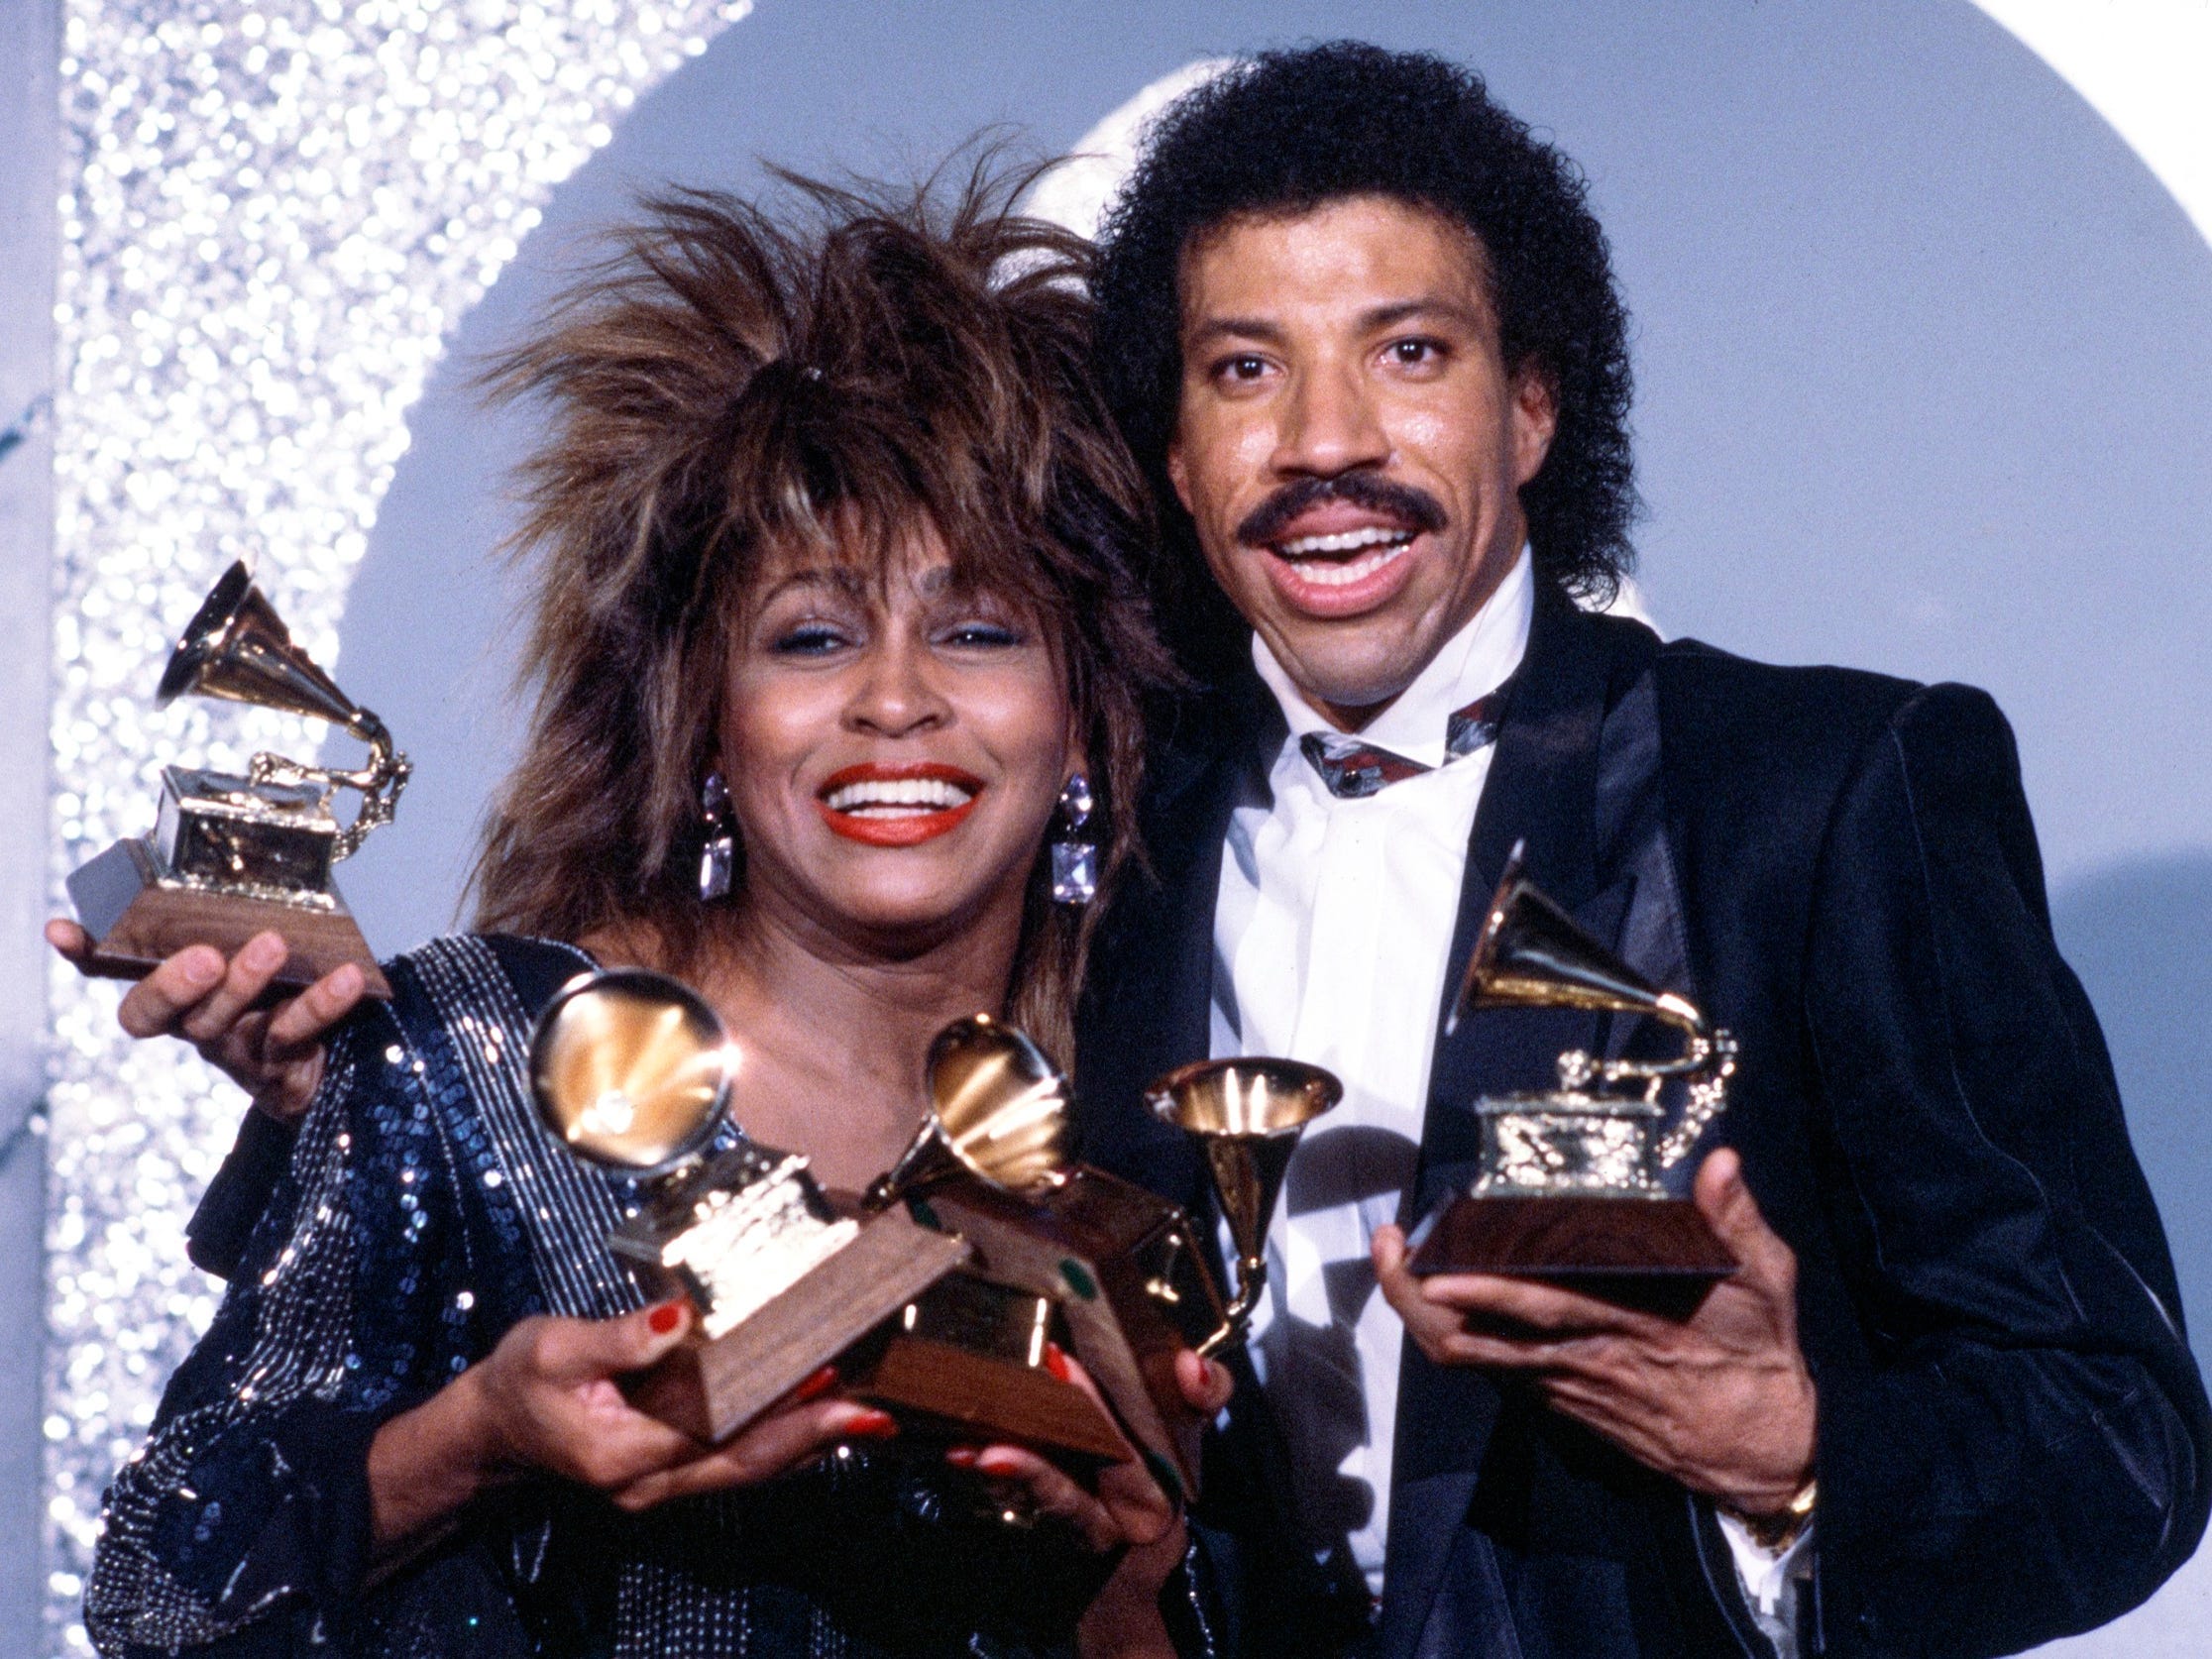 LOS ANGELES - FEBRUARY 26: Pictured from left is Tina Turner and Lionel Richie on THE 27TH ANNUAL GRAMMY AWARDS, February 26, 1985, Shrine Auditorium, Los Angeles, CA.